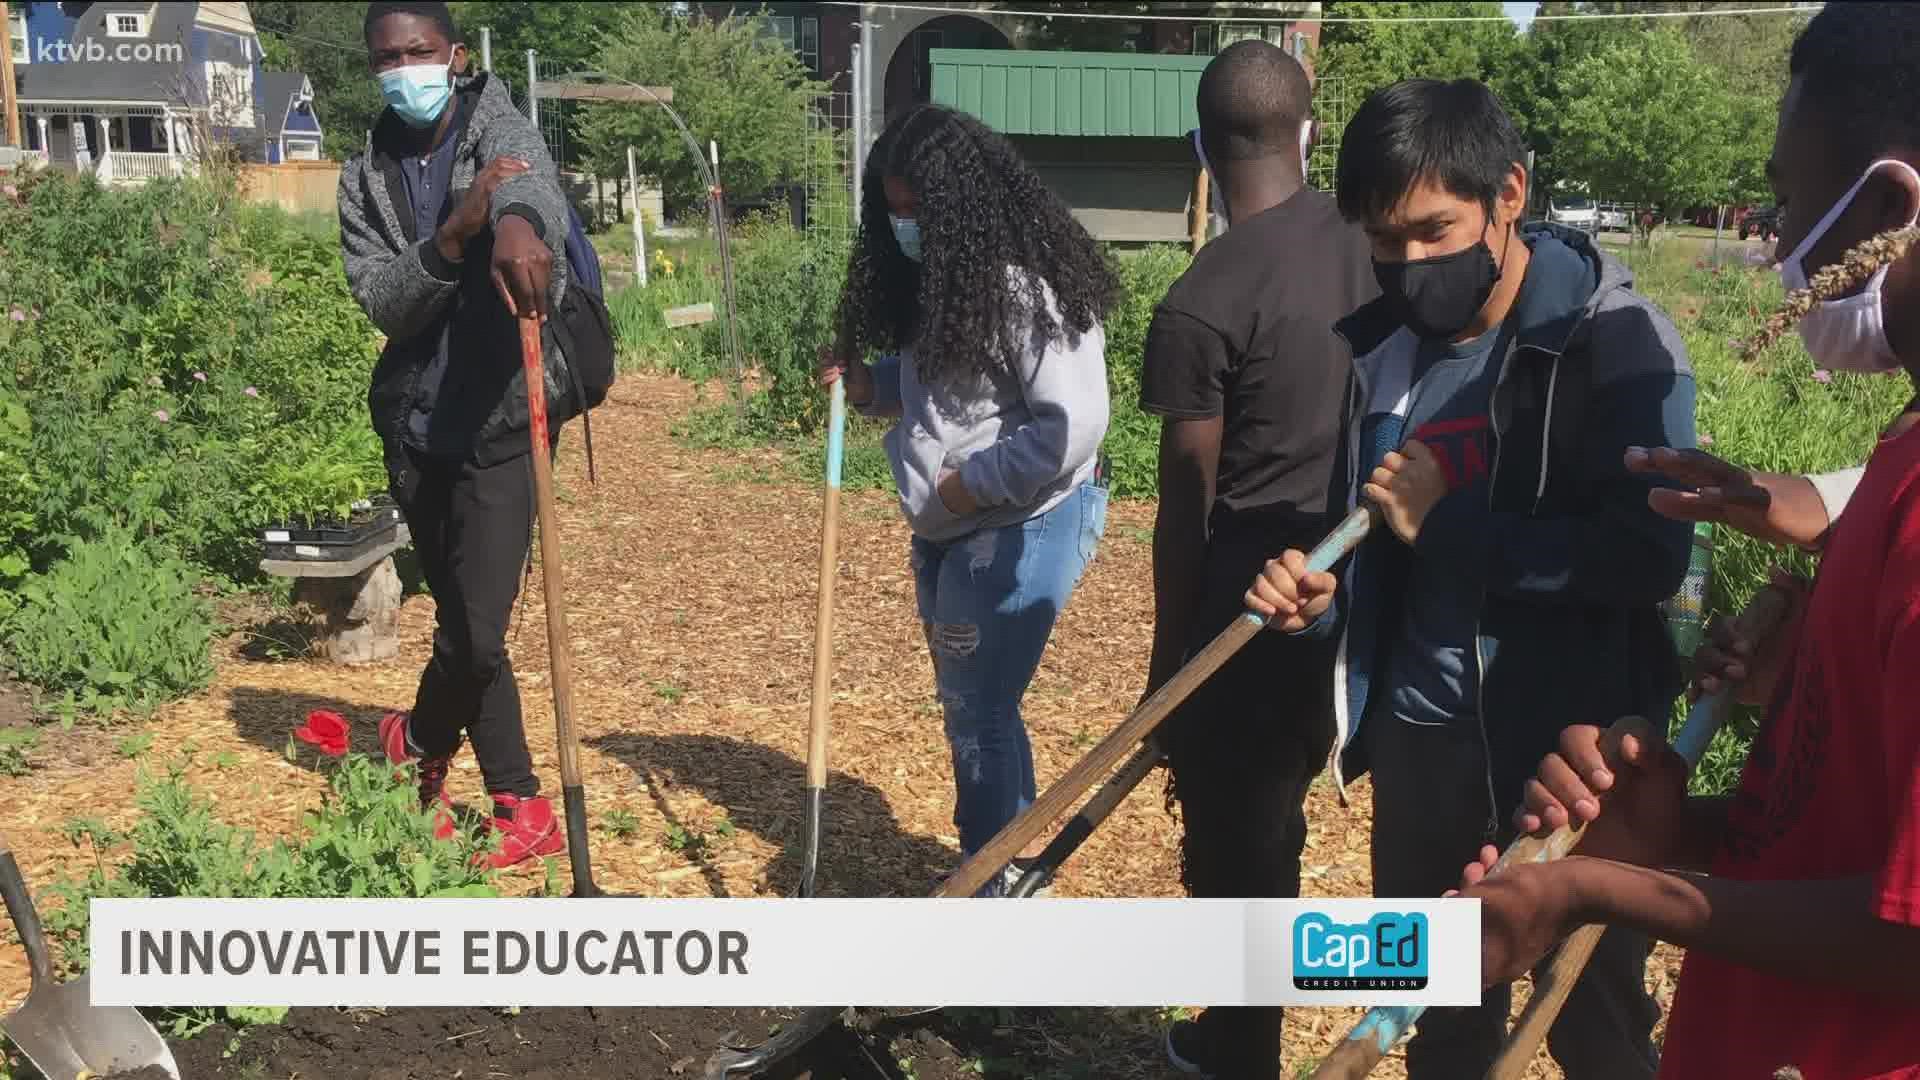 The 'Downtown Teaching Farm' lets kids get dirty as they learn hands-on lessons about the science of growing.